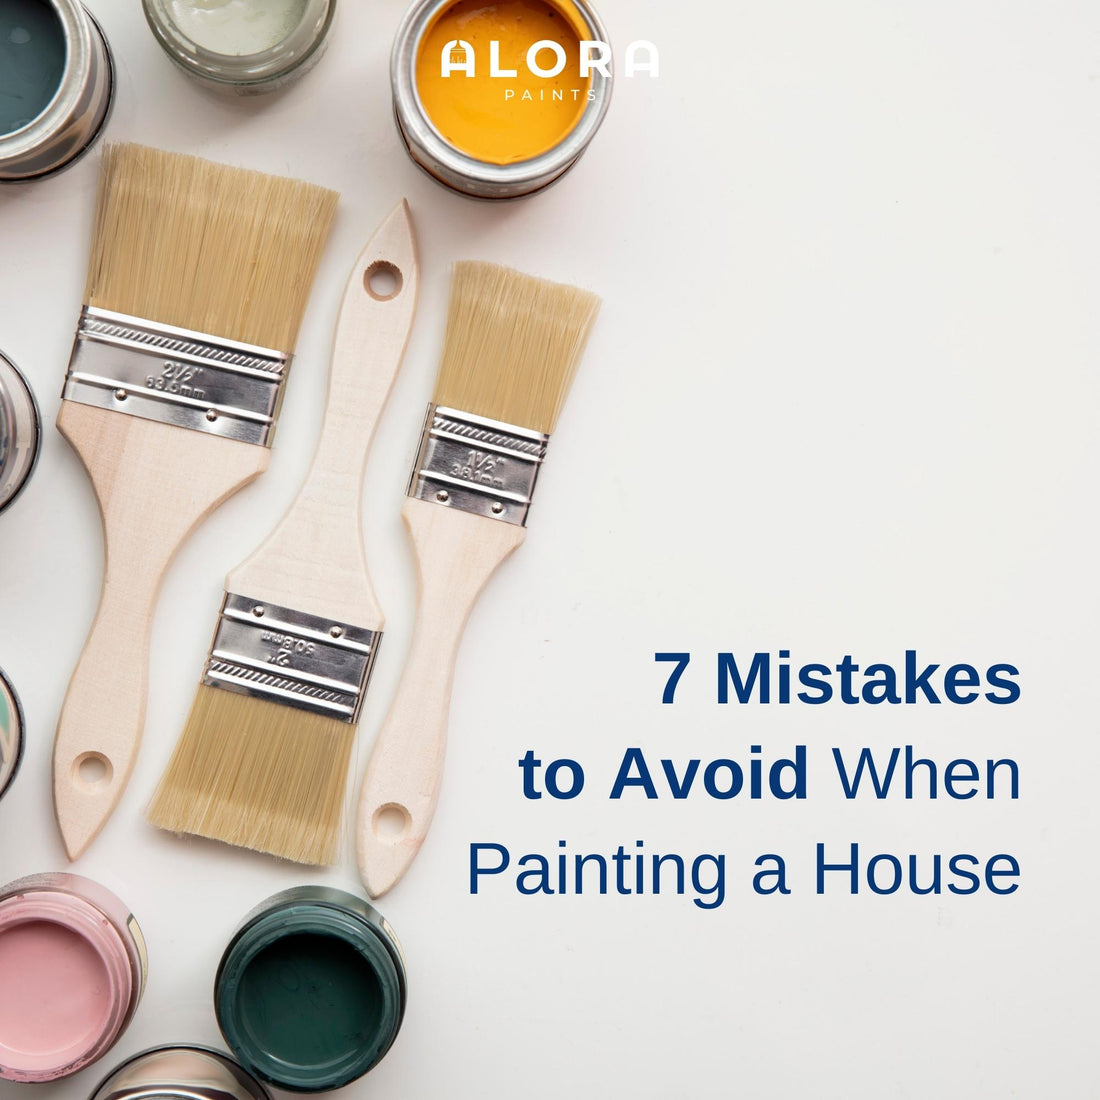 7 Mistakes to Avoid When Painting